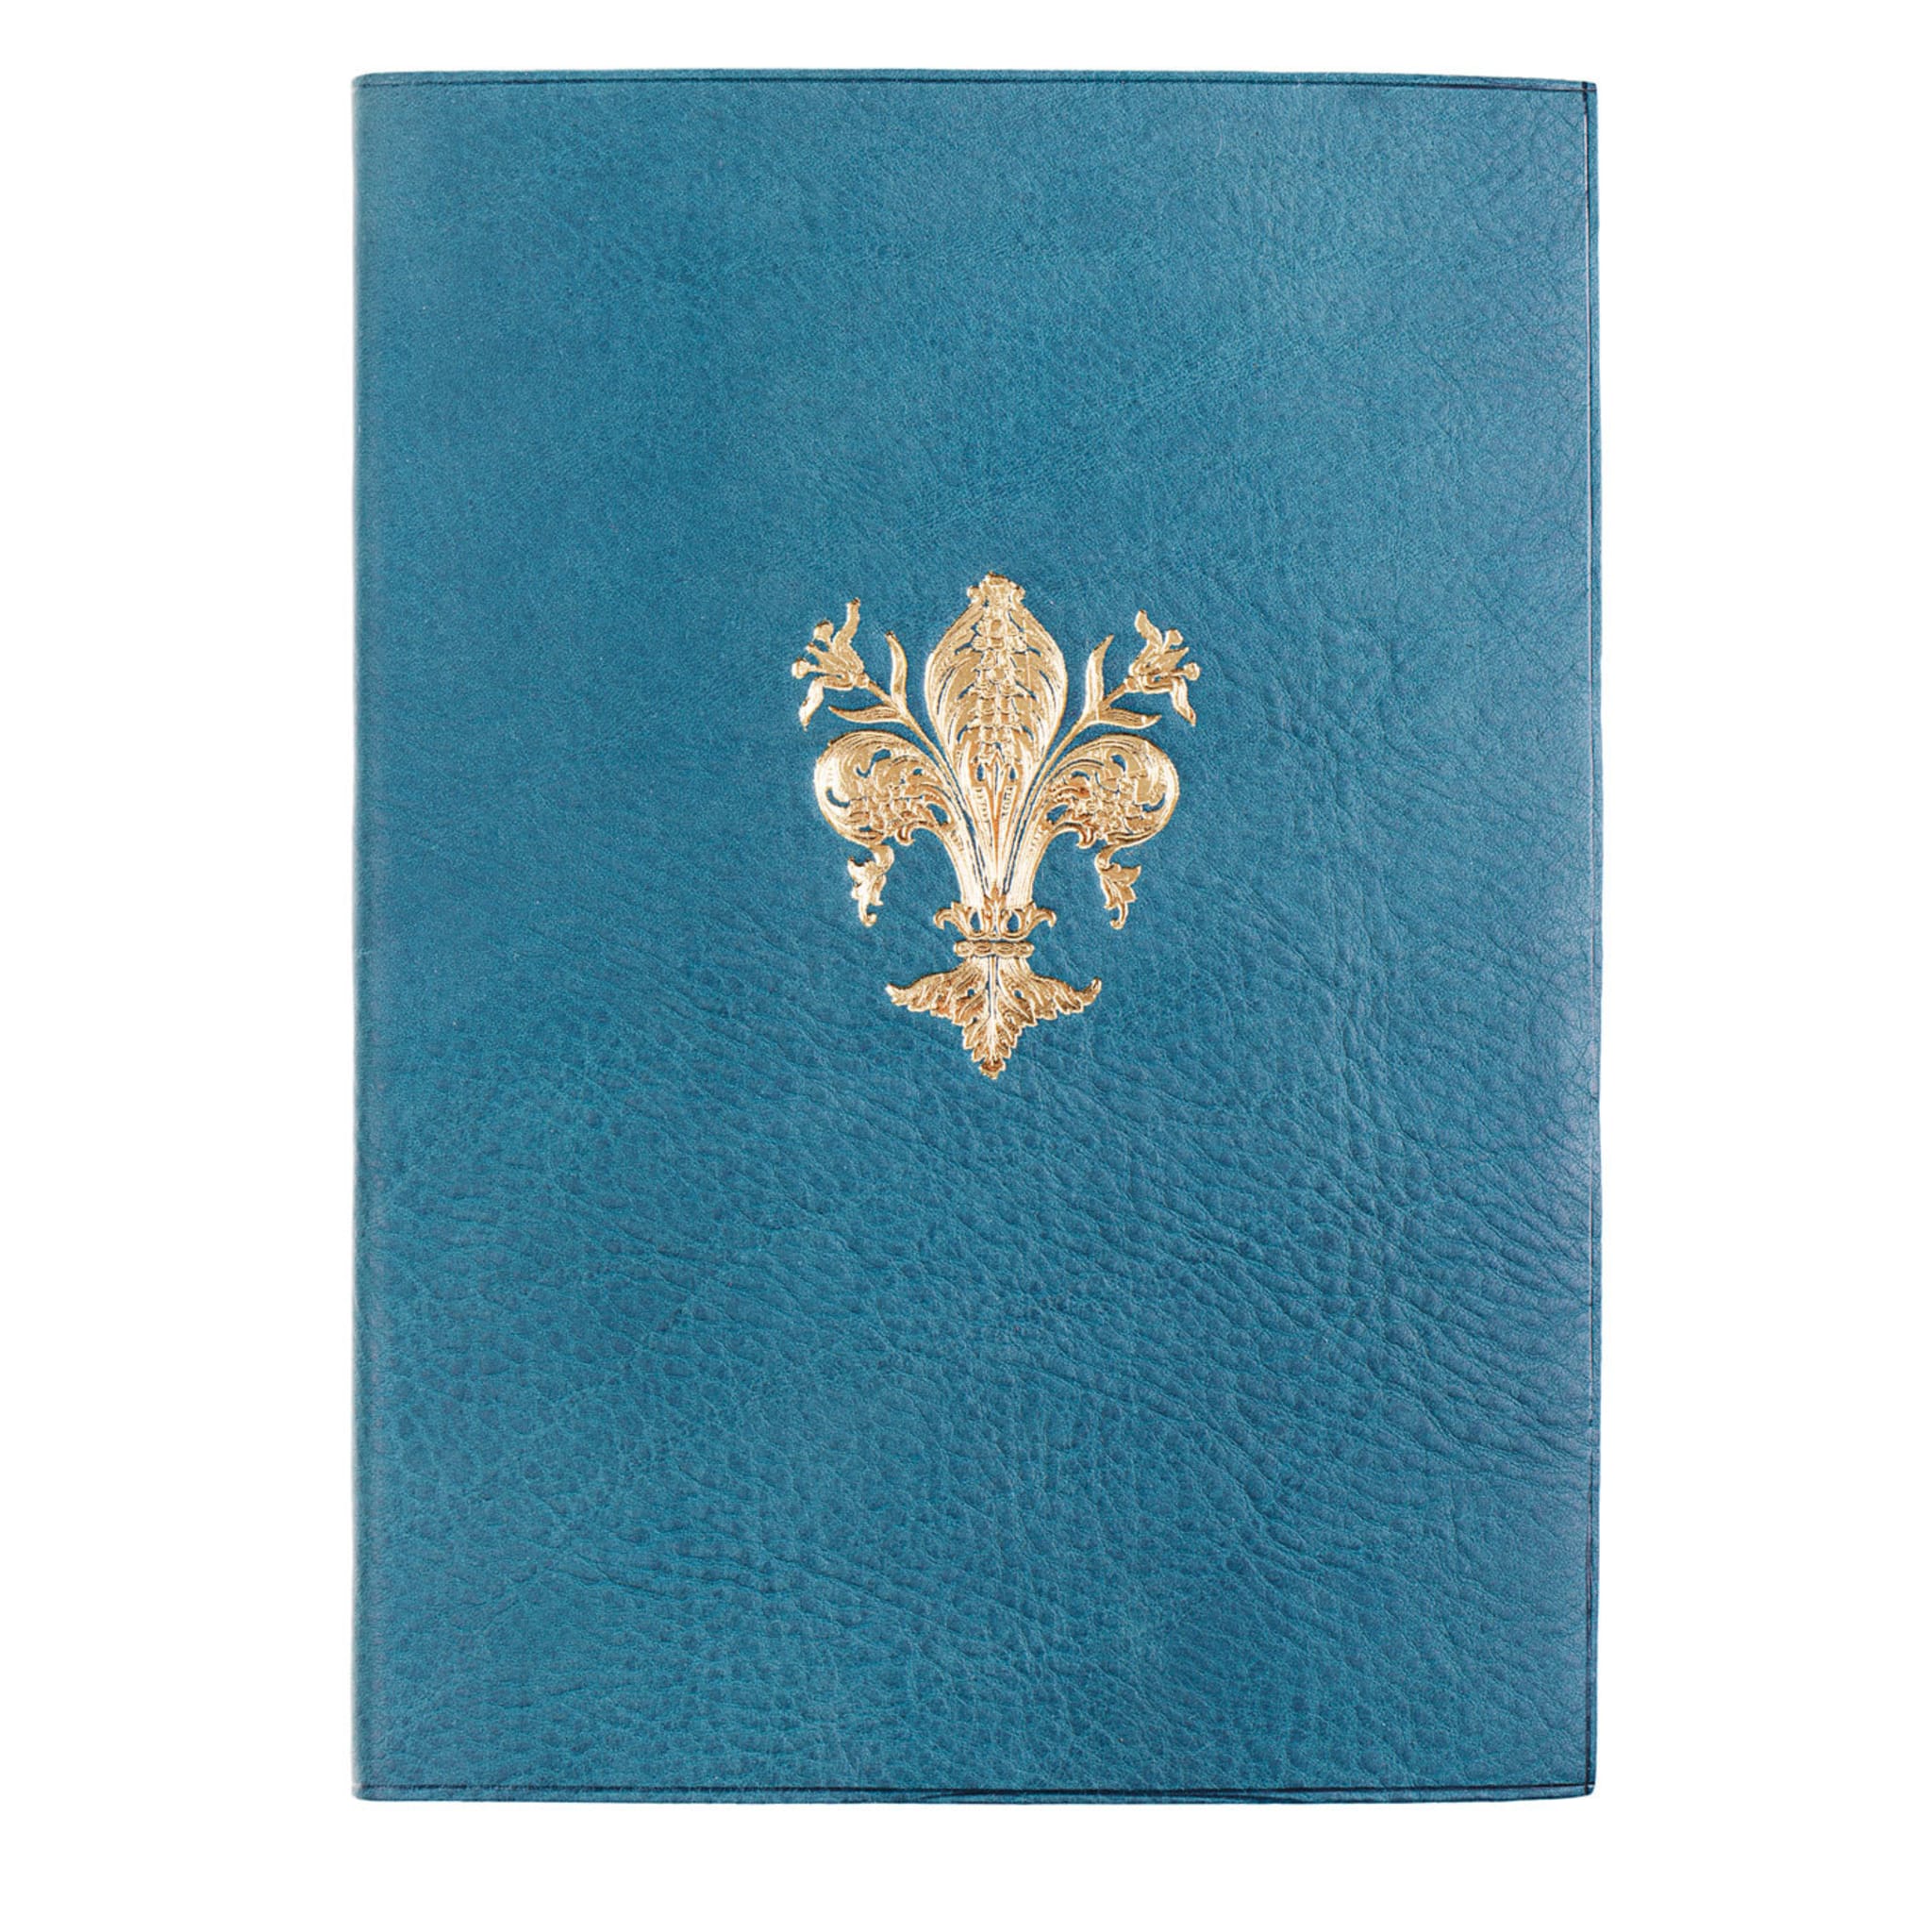 Gold Lily Blue Leather Notebook - Alternative view 2